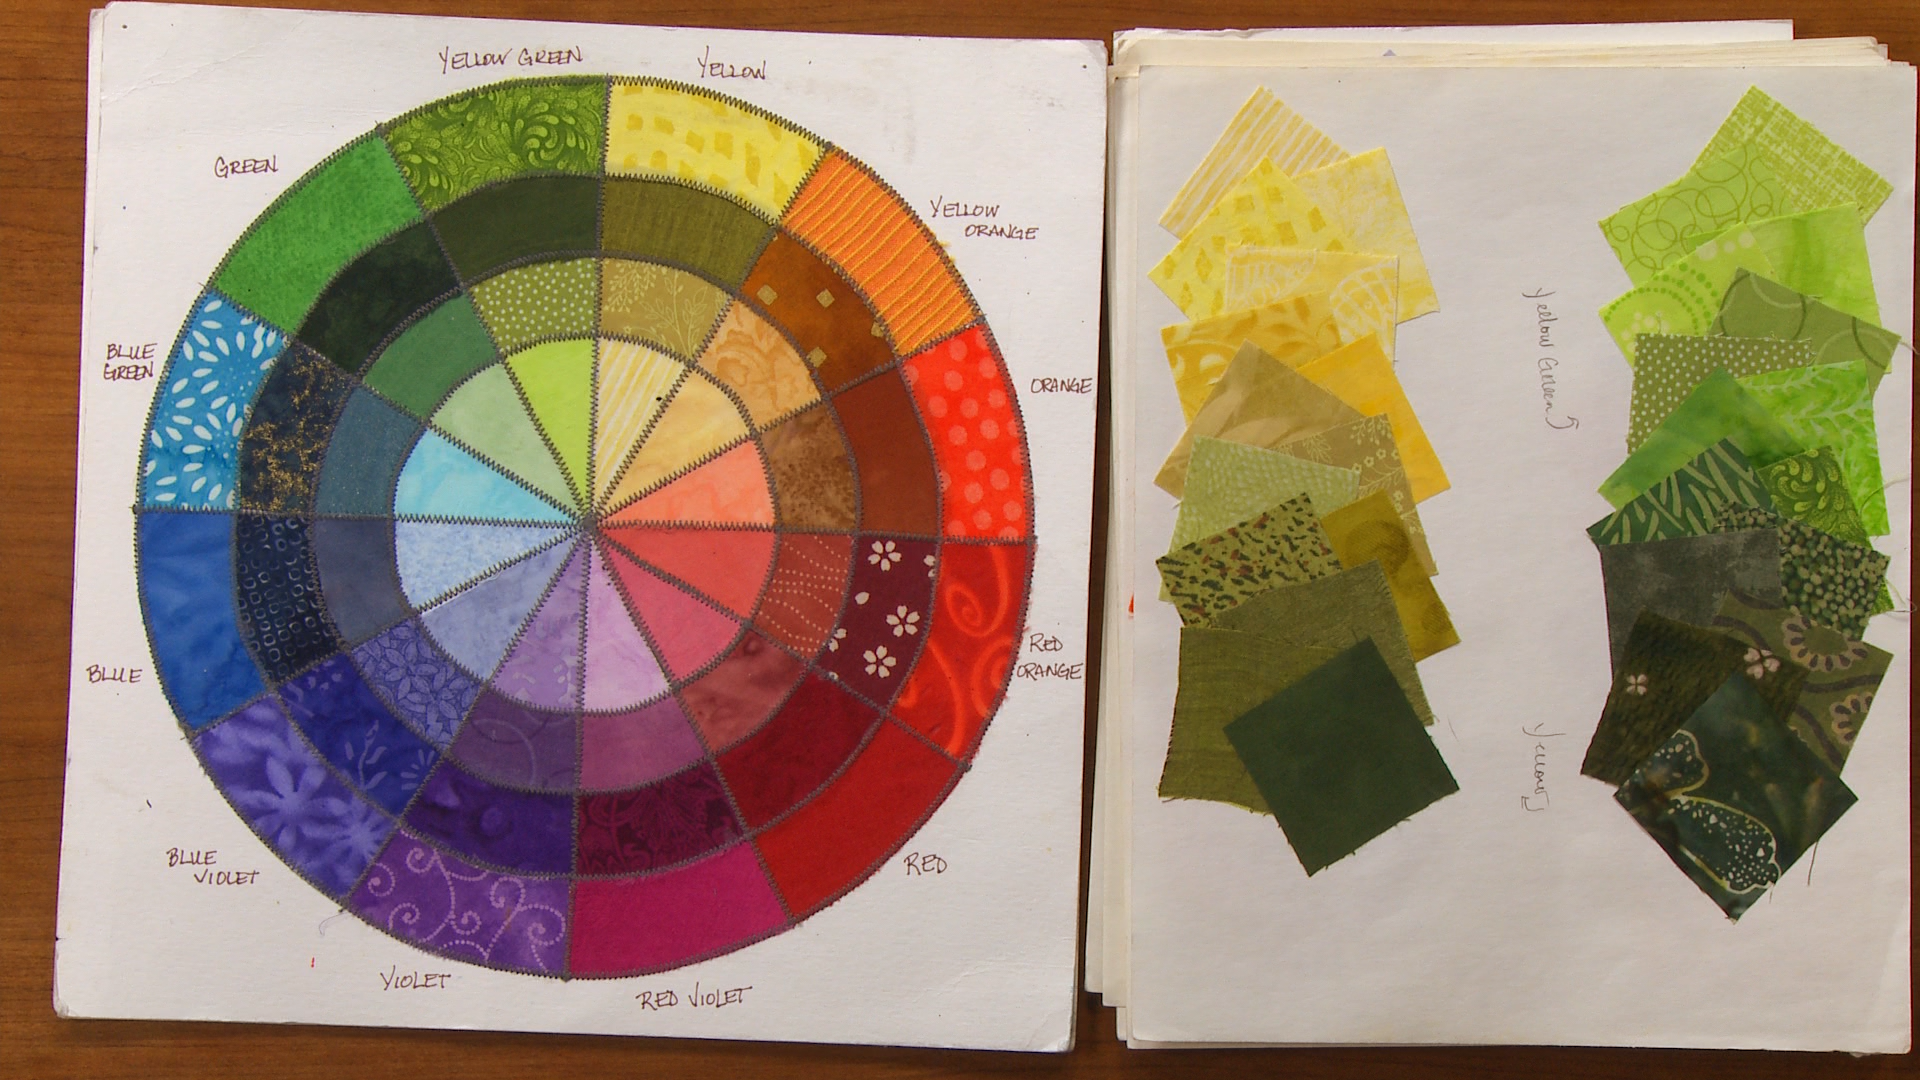 Session 2: The Color Wheel and Color Scale